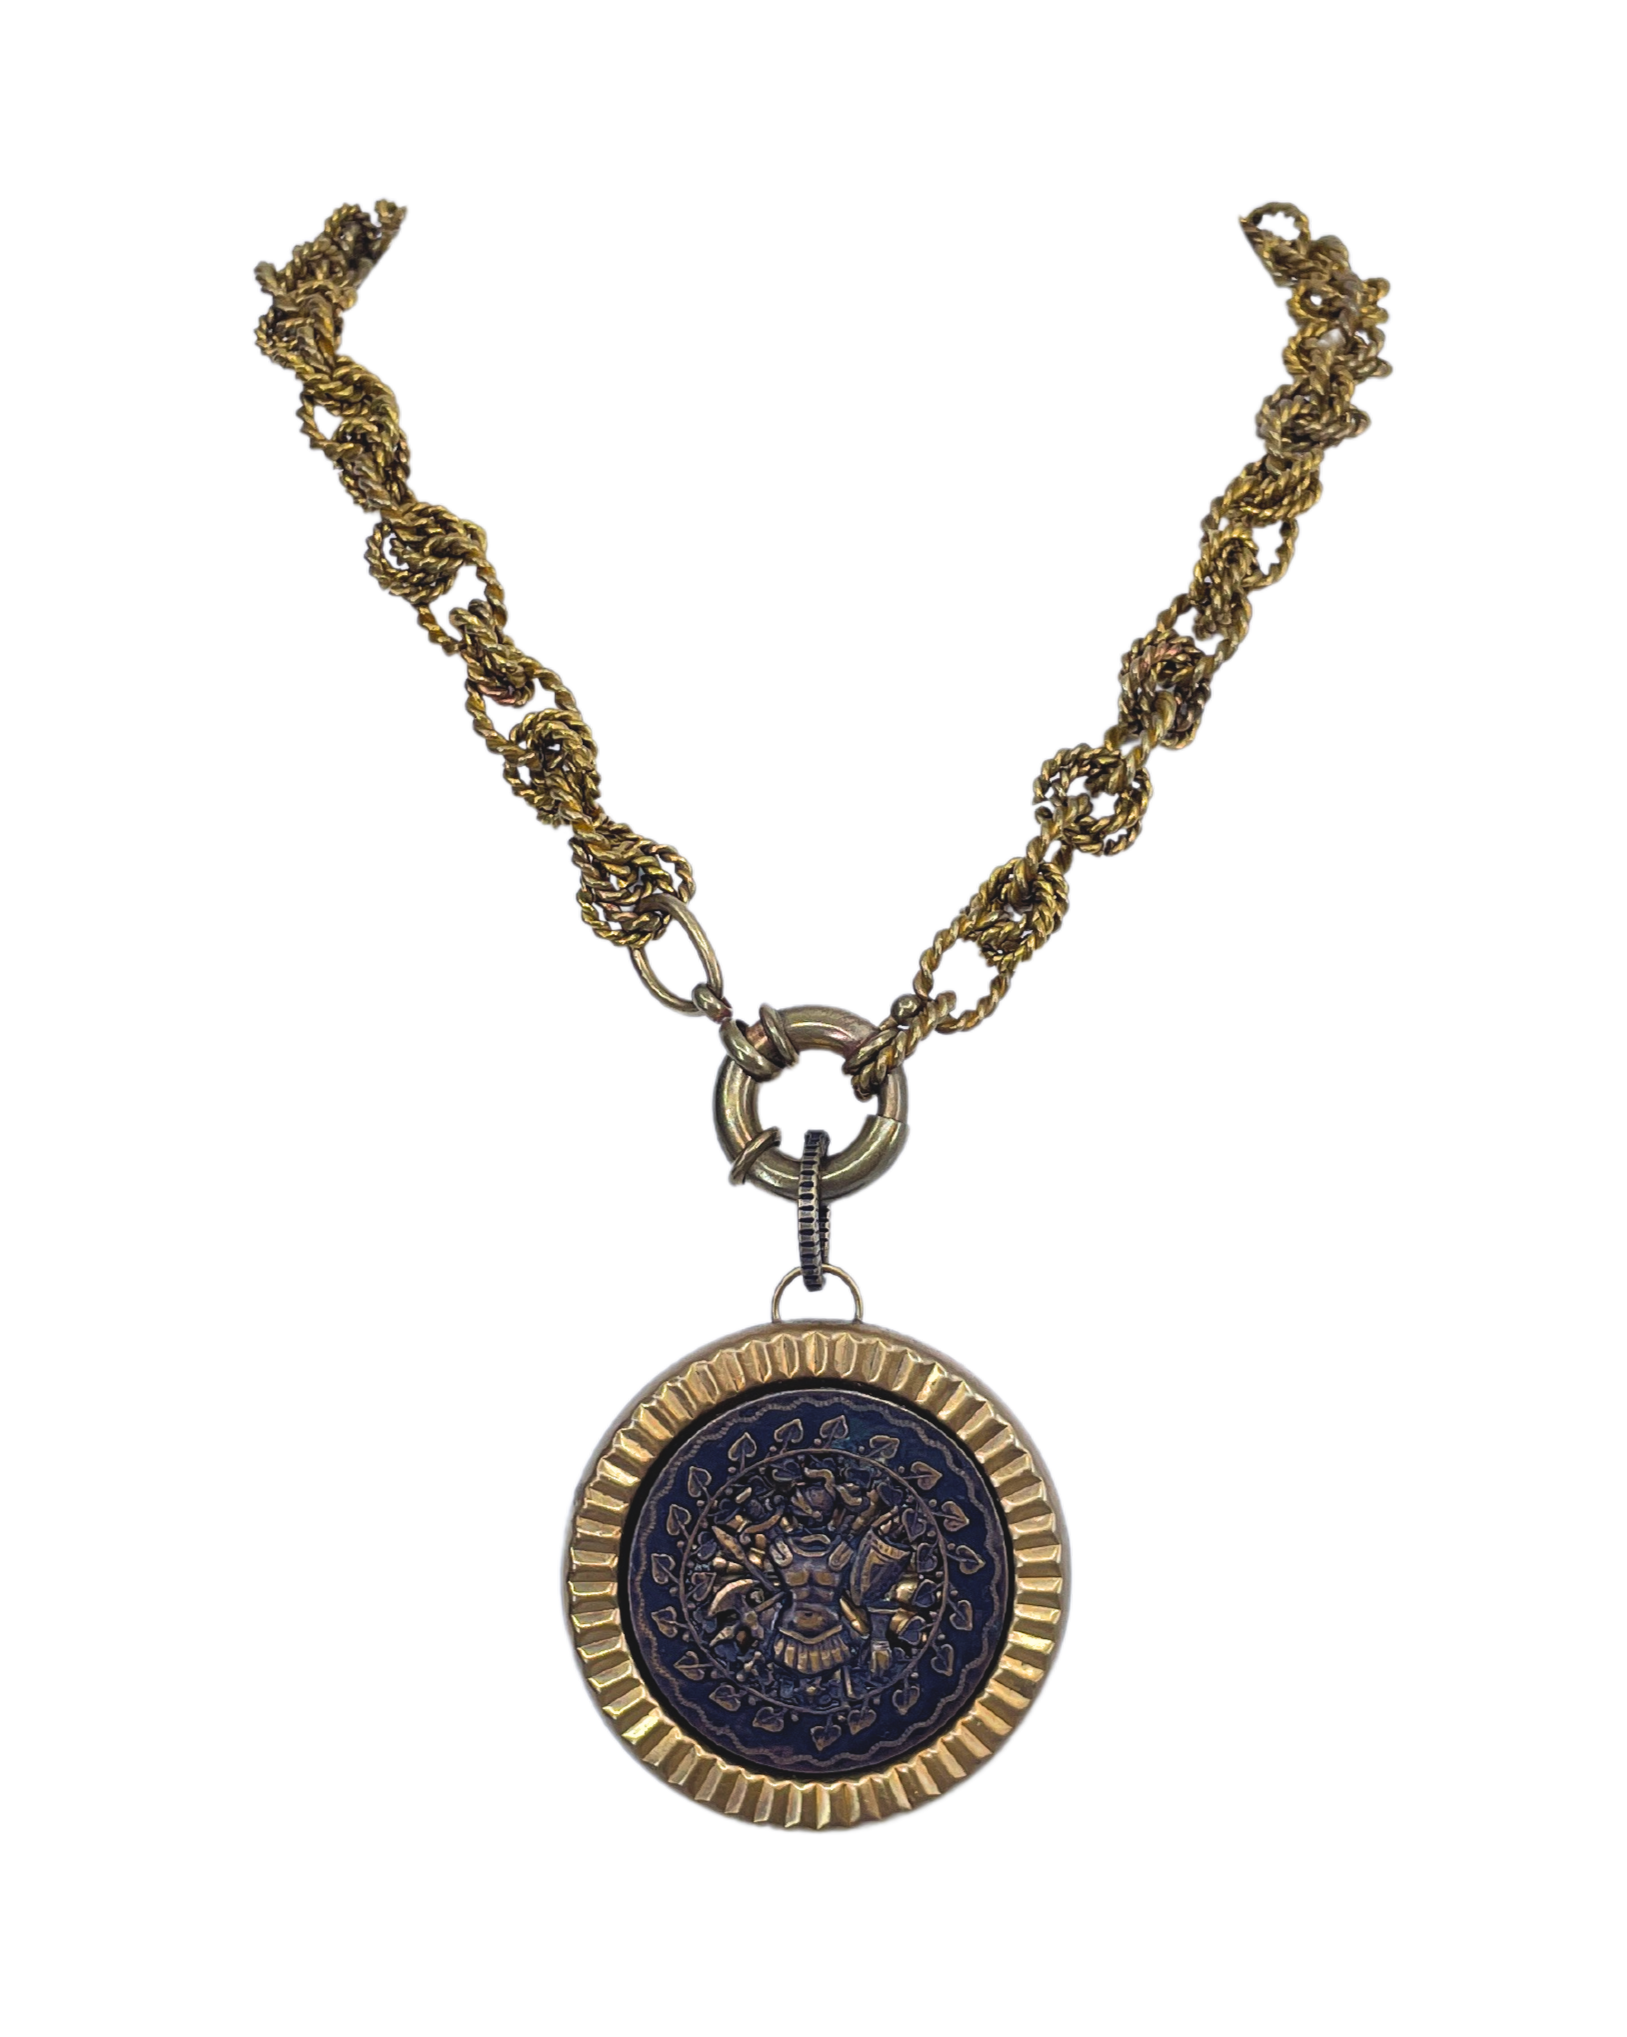 One-of-a-Kind Victorian Button Pendant Necklace